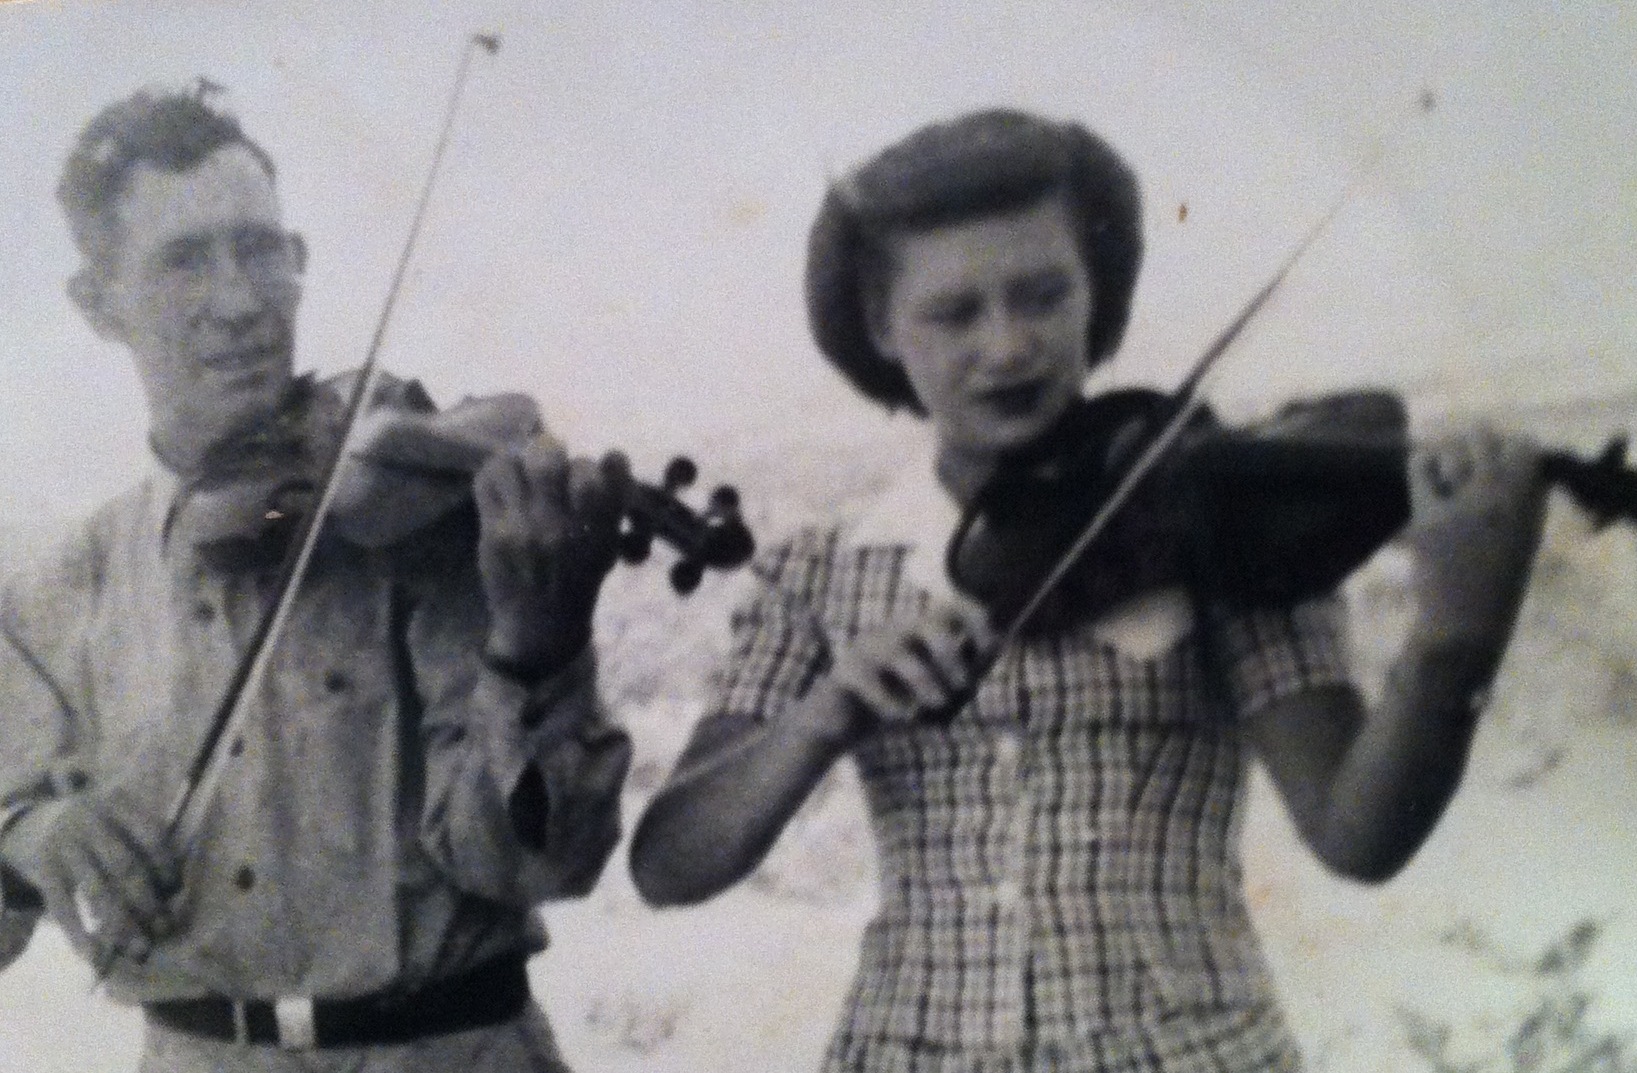 Tom depended on his daughter Jan for backup at dances until she left for college in 1947. They also enjoyed twin fiddling on hymns.